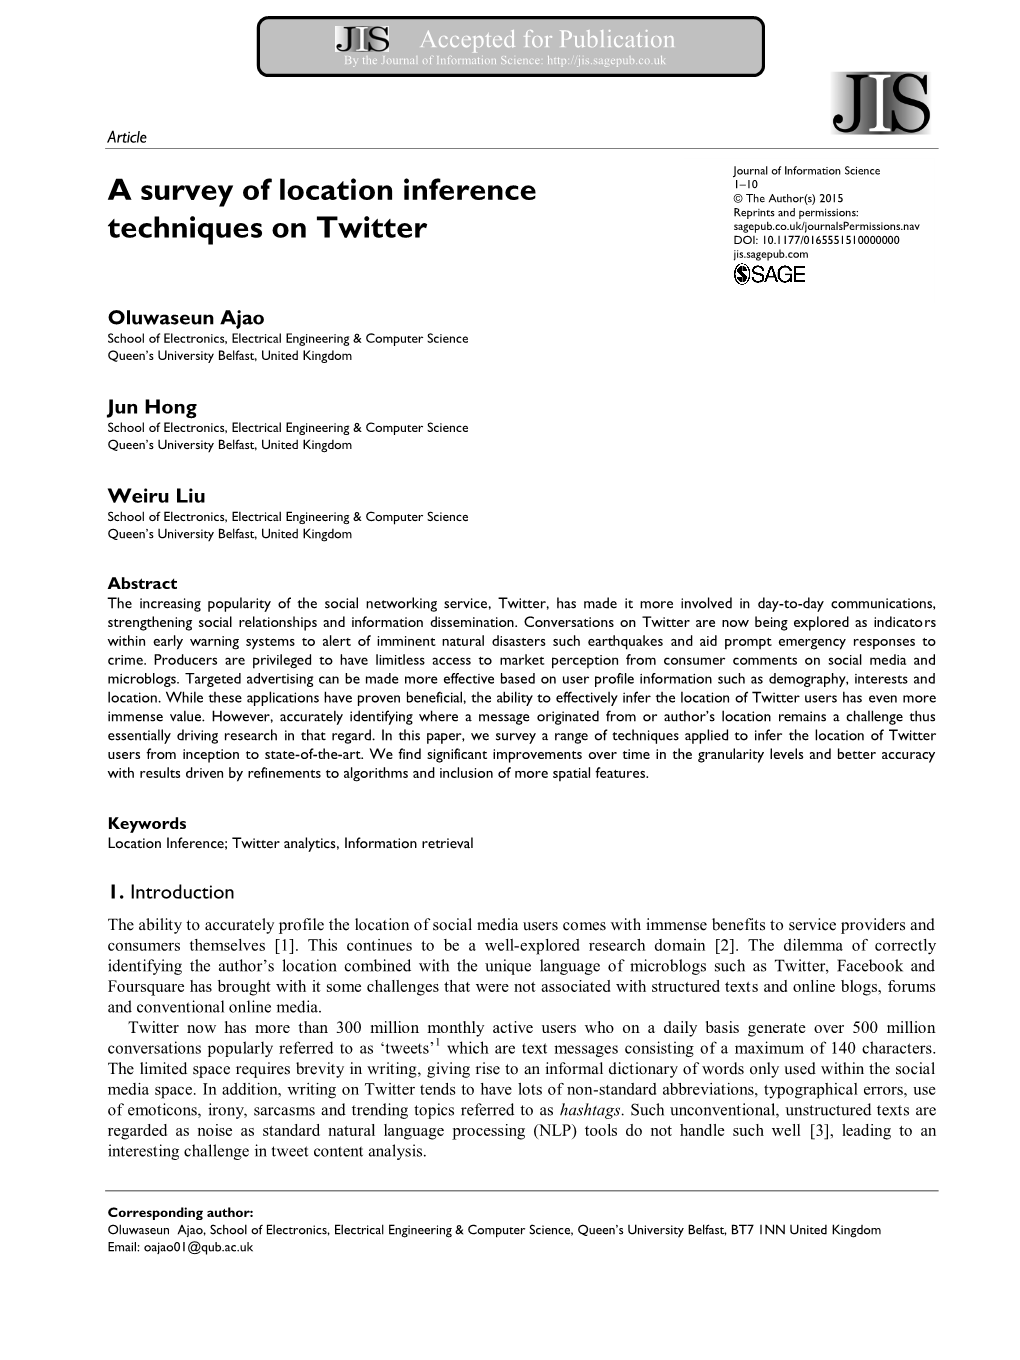 A Survey of Location Inference Techniques on Twitter